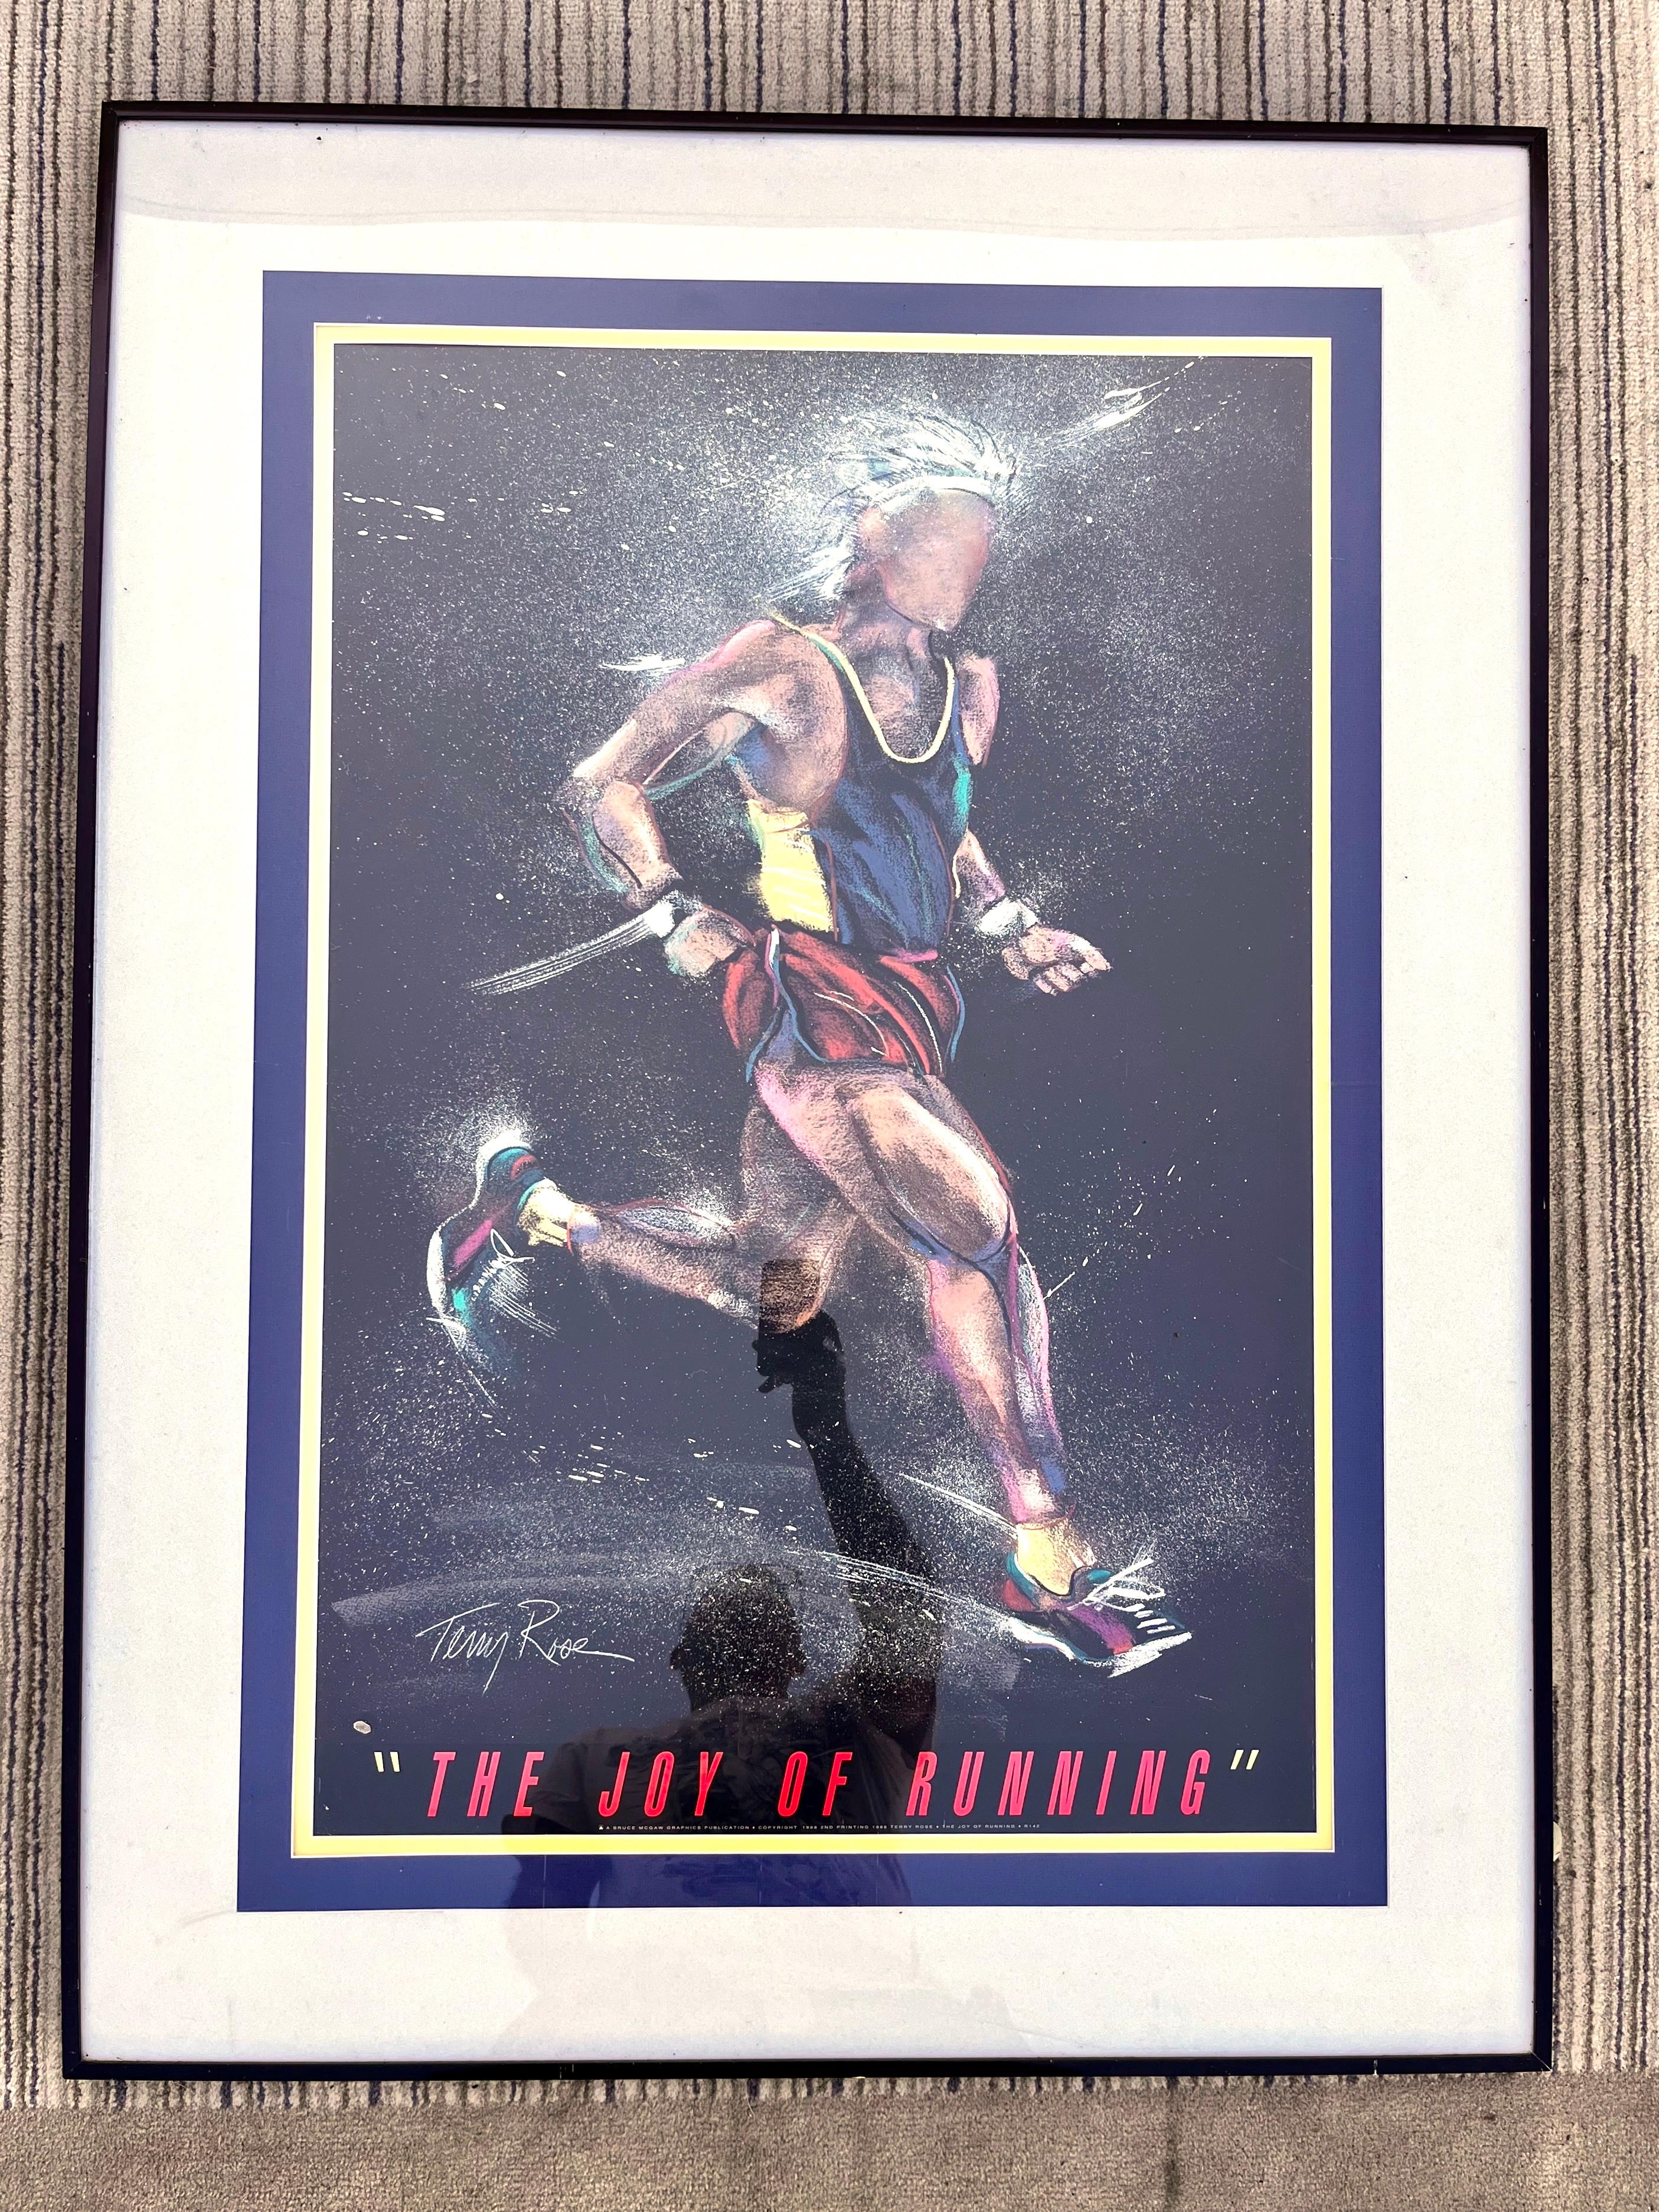 Large vintage The Joy of Running Framed Original Poster by Terry Rose .
Framed Dated 1988
Publisher: McGaw Graphics:
Features a runner depicted in a quintessential PostModern 1980s Style and colors. 
In excellent original condition with very